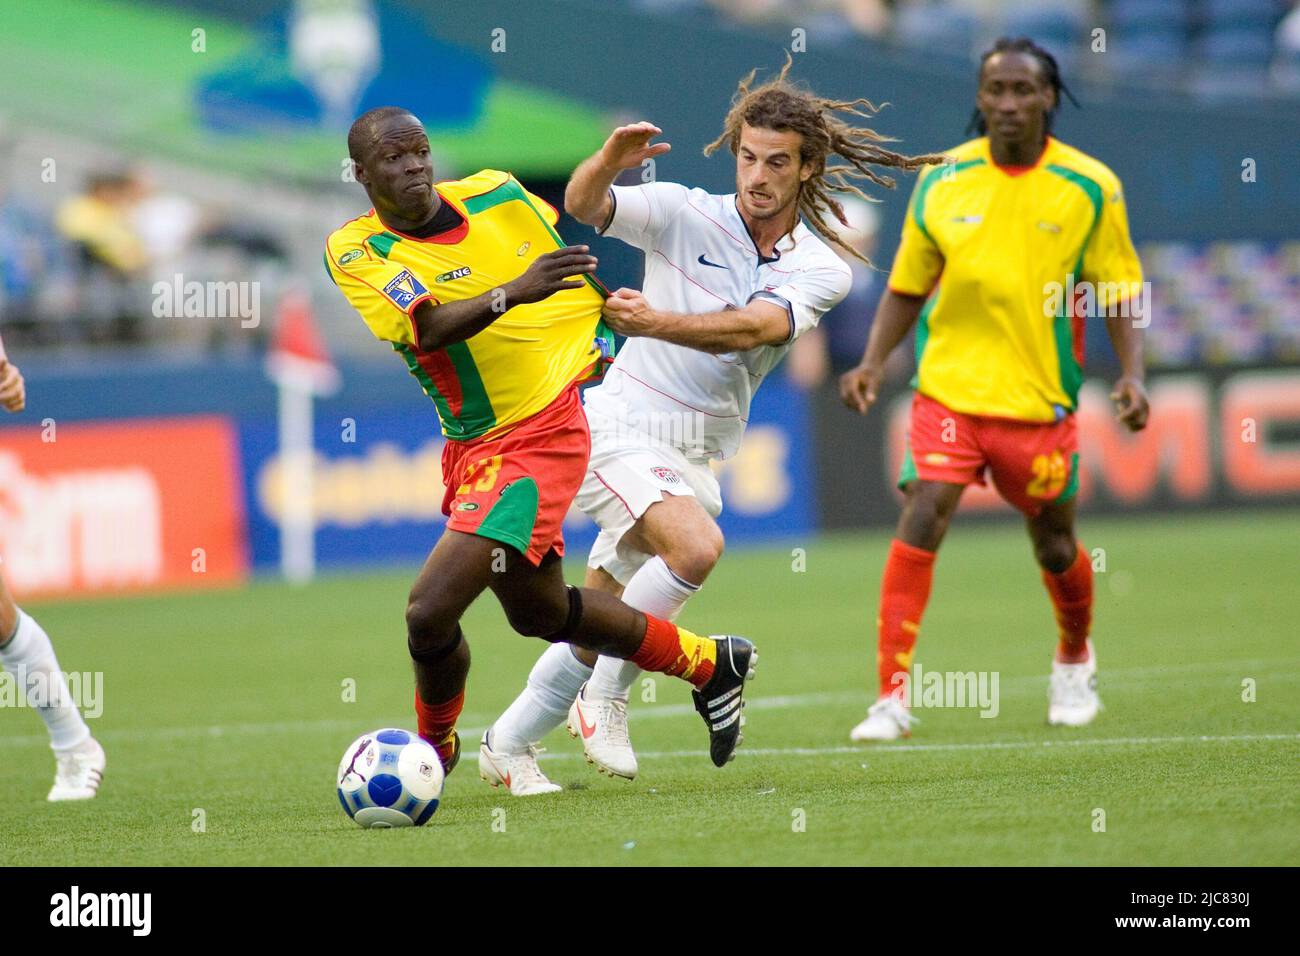 Seattle, Washington, USA. 04th July, 2009. PATRICK MODESTE (23) trying to escape the grasp of KYLE BECKERMAN (5). Gold Cup 2009, Grenada vs. United States at Qwest Field in Seattle, WA. (Credit Image: © Andrew Fredrickson/Southcreek Global/ZUMA Press) Stock Photo